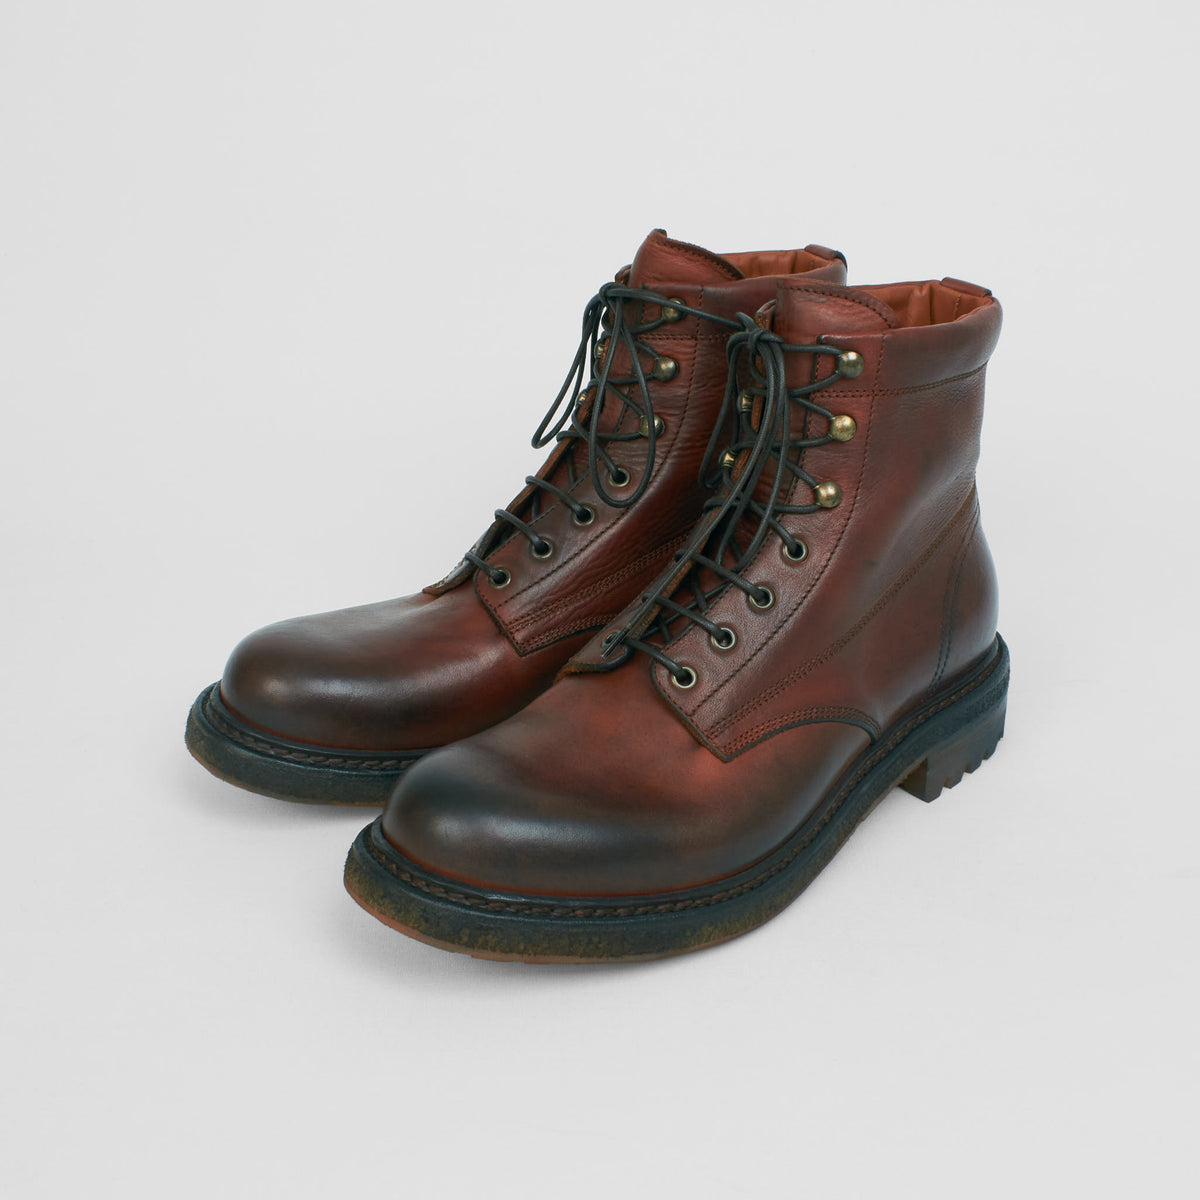 Silvano Sassetti Goodyear Welted Leather Lined Boot